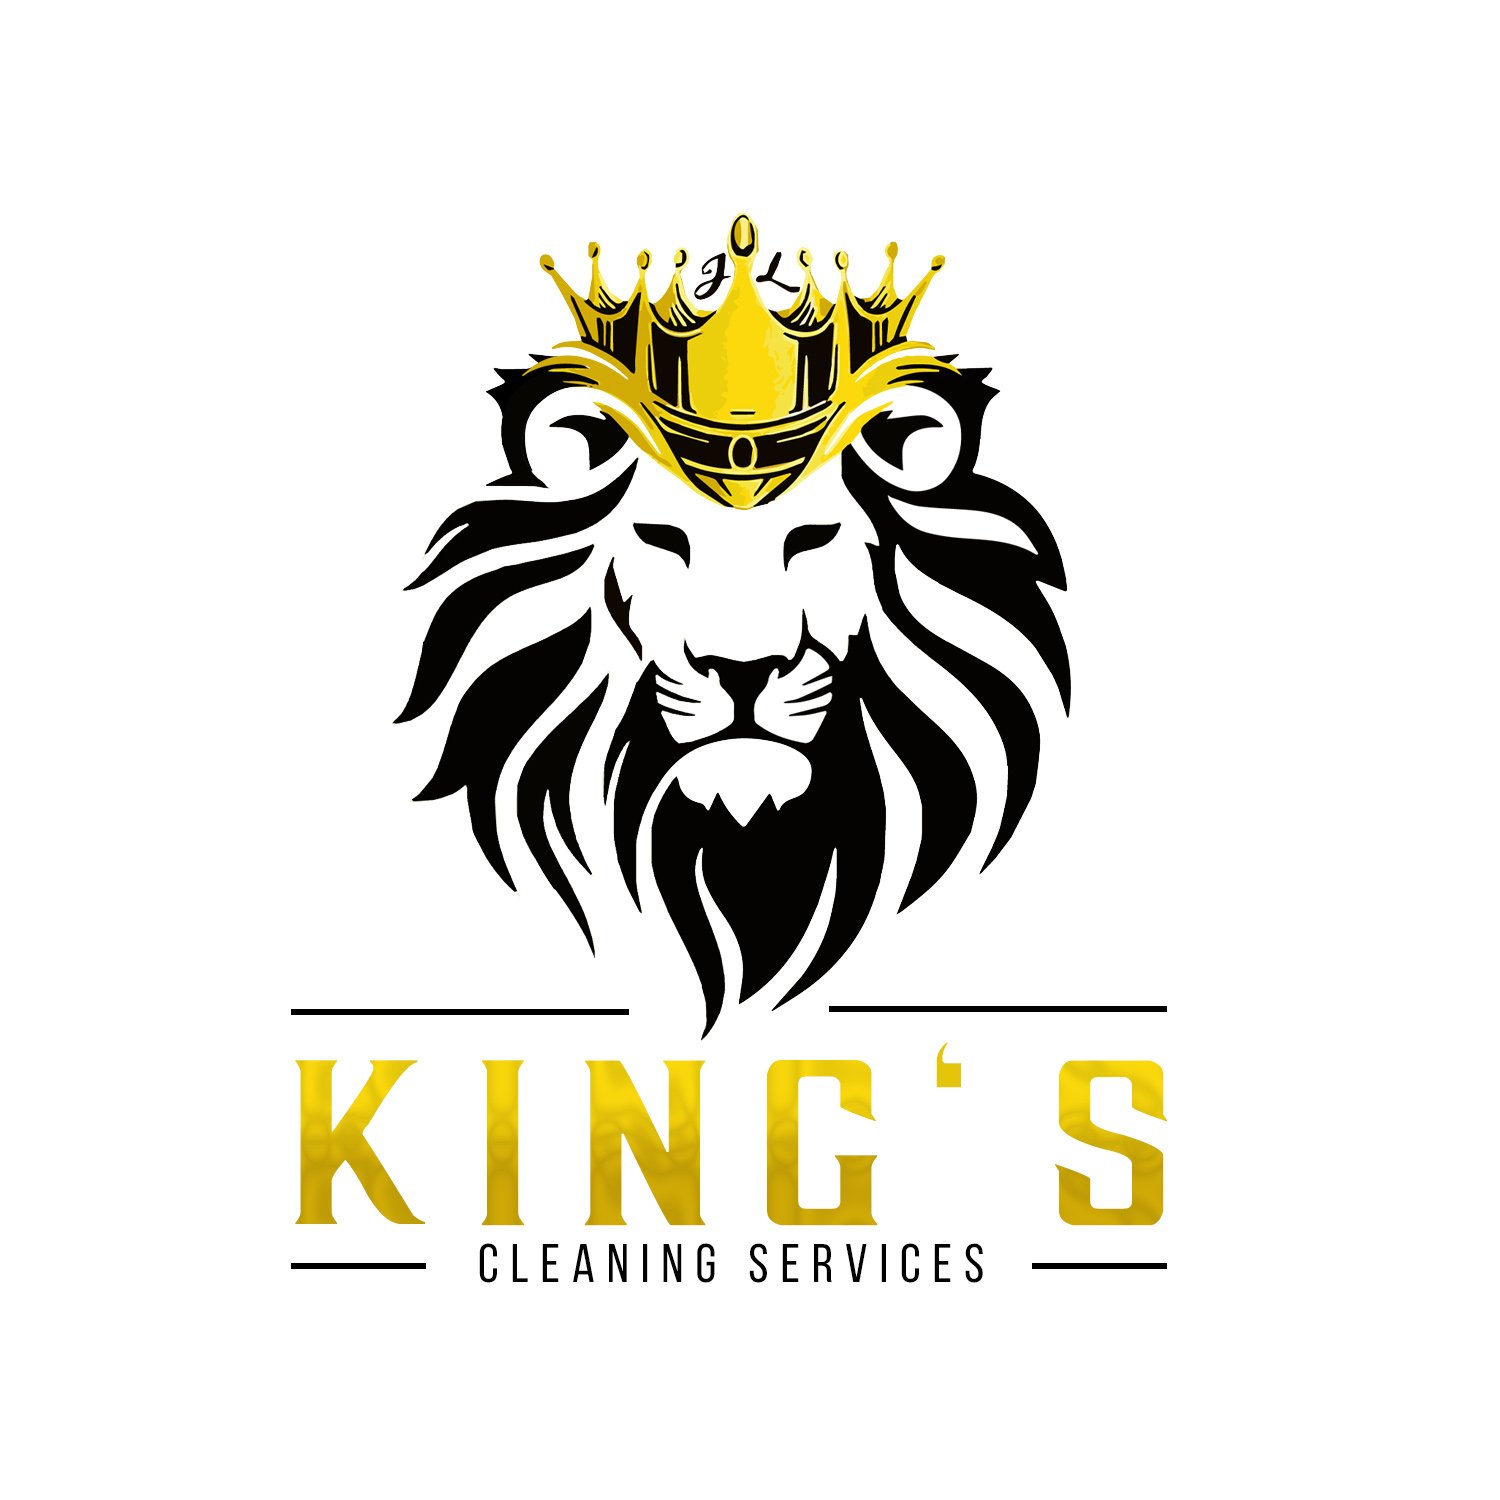 Kings Cleaning Services LLC Logo